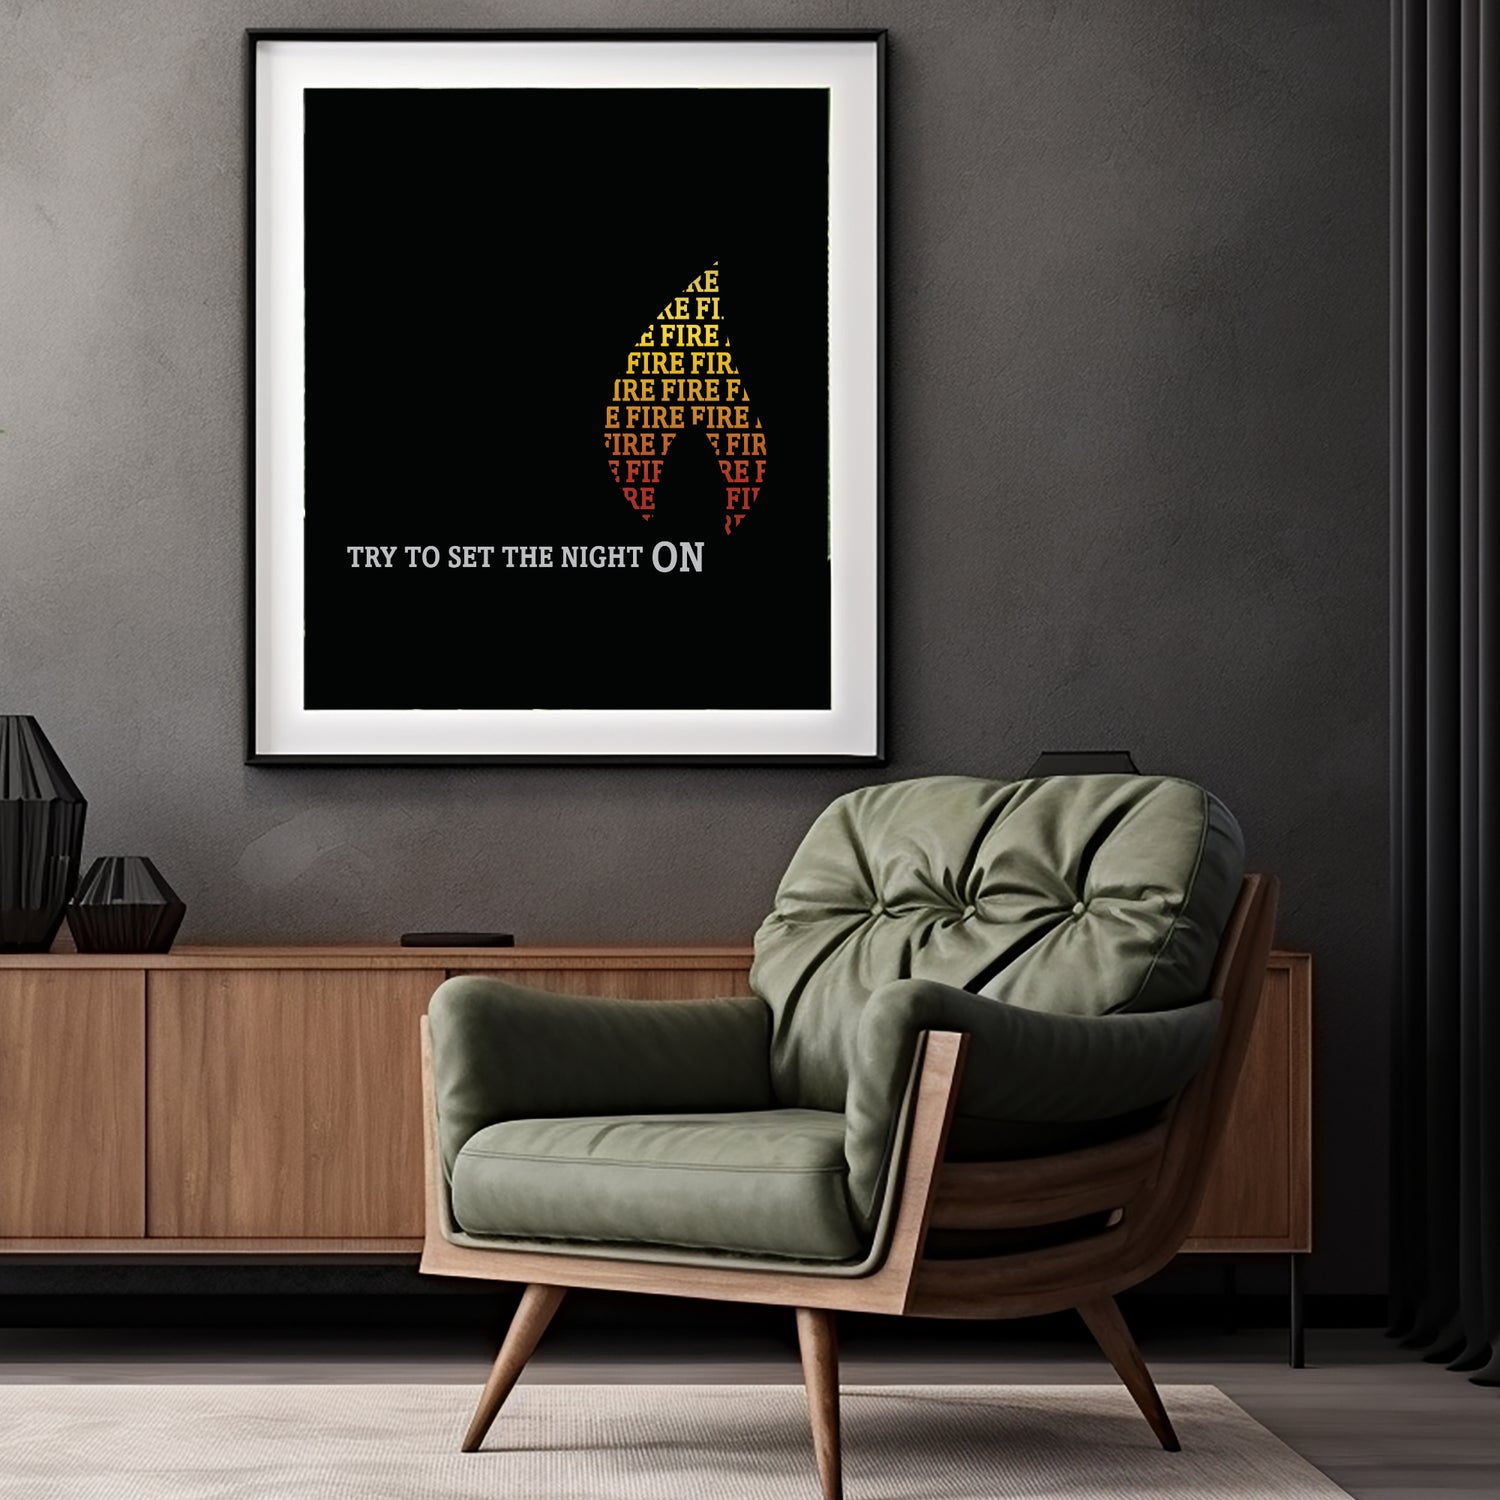 Light my Fire by the Doors Song Lyric Wall Print Poster Art of Classic Rock Music